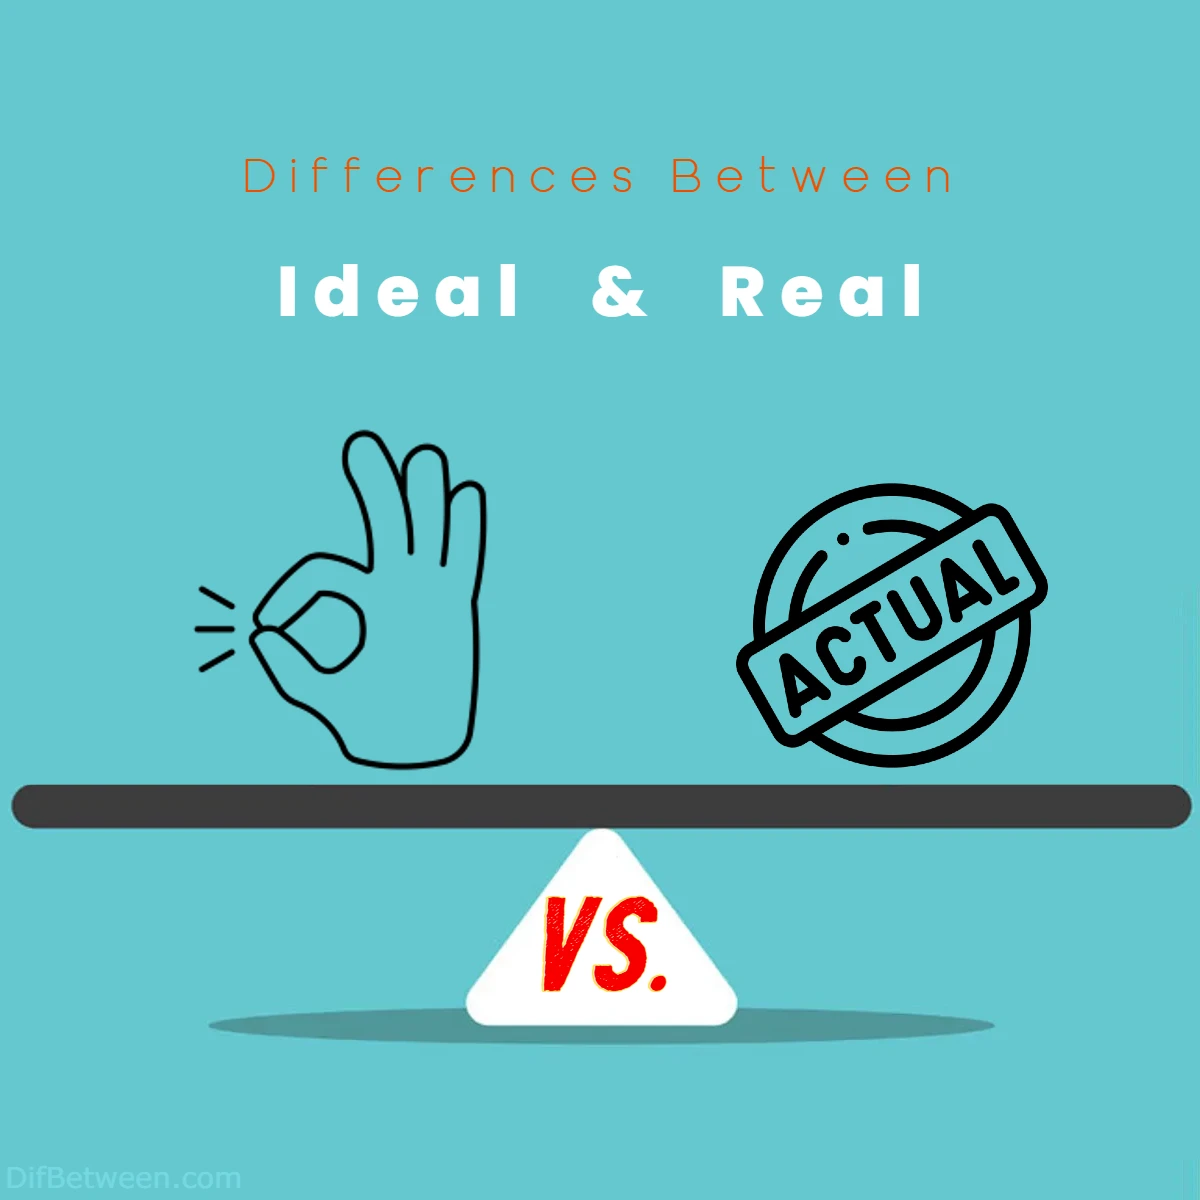 Differences Between Ideal vs Real